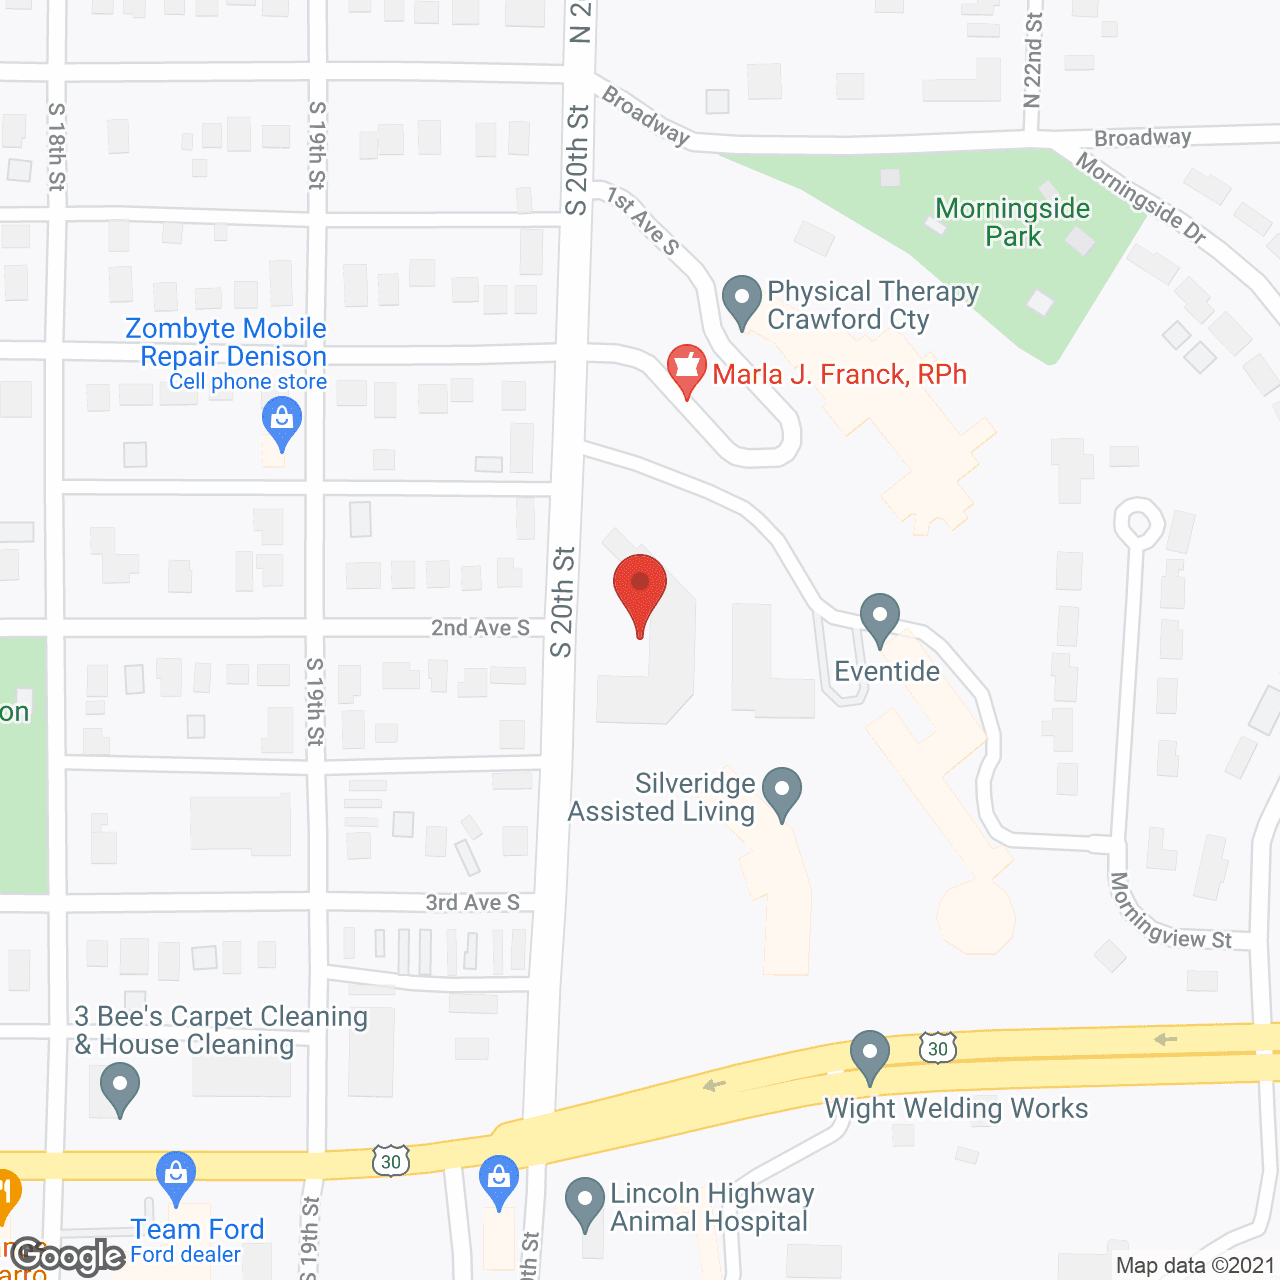 Silveridge Assisted Living in google map